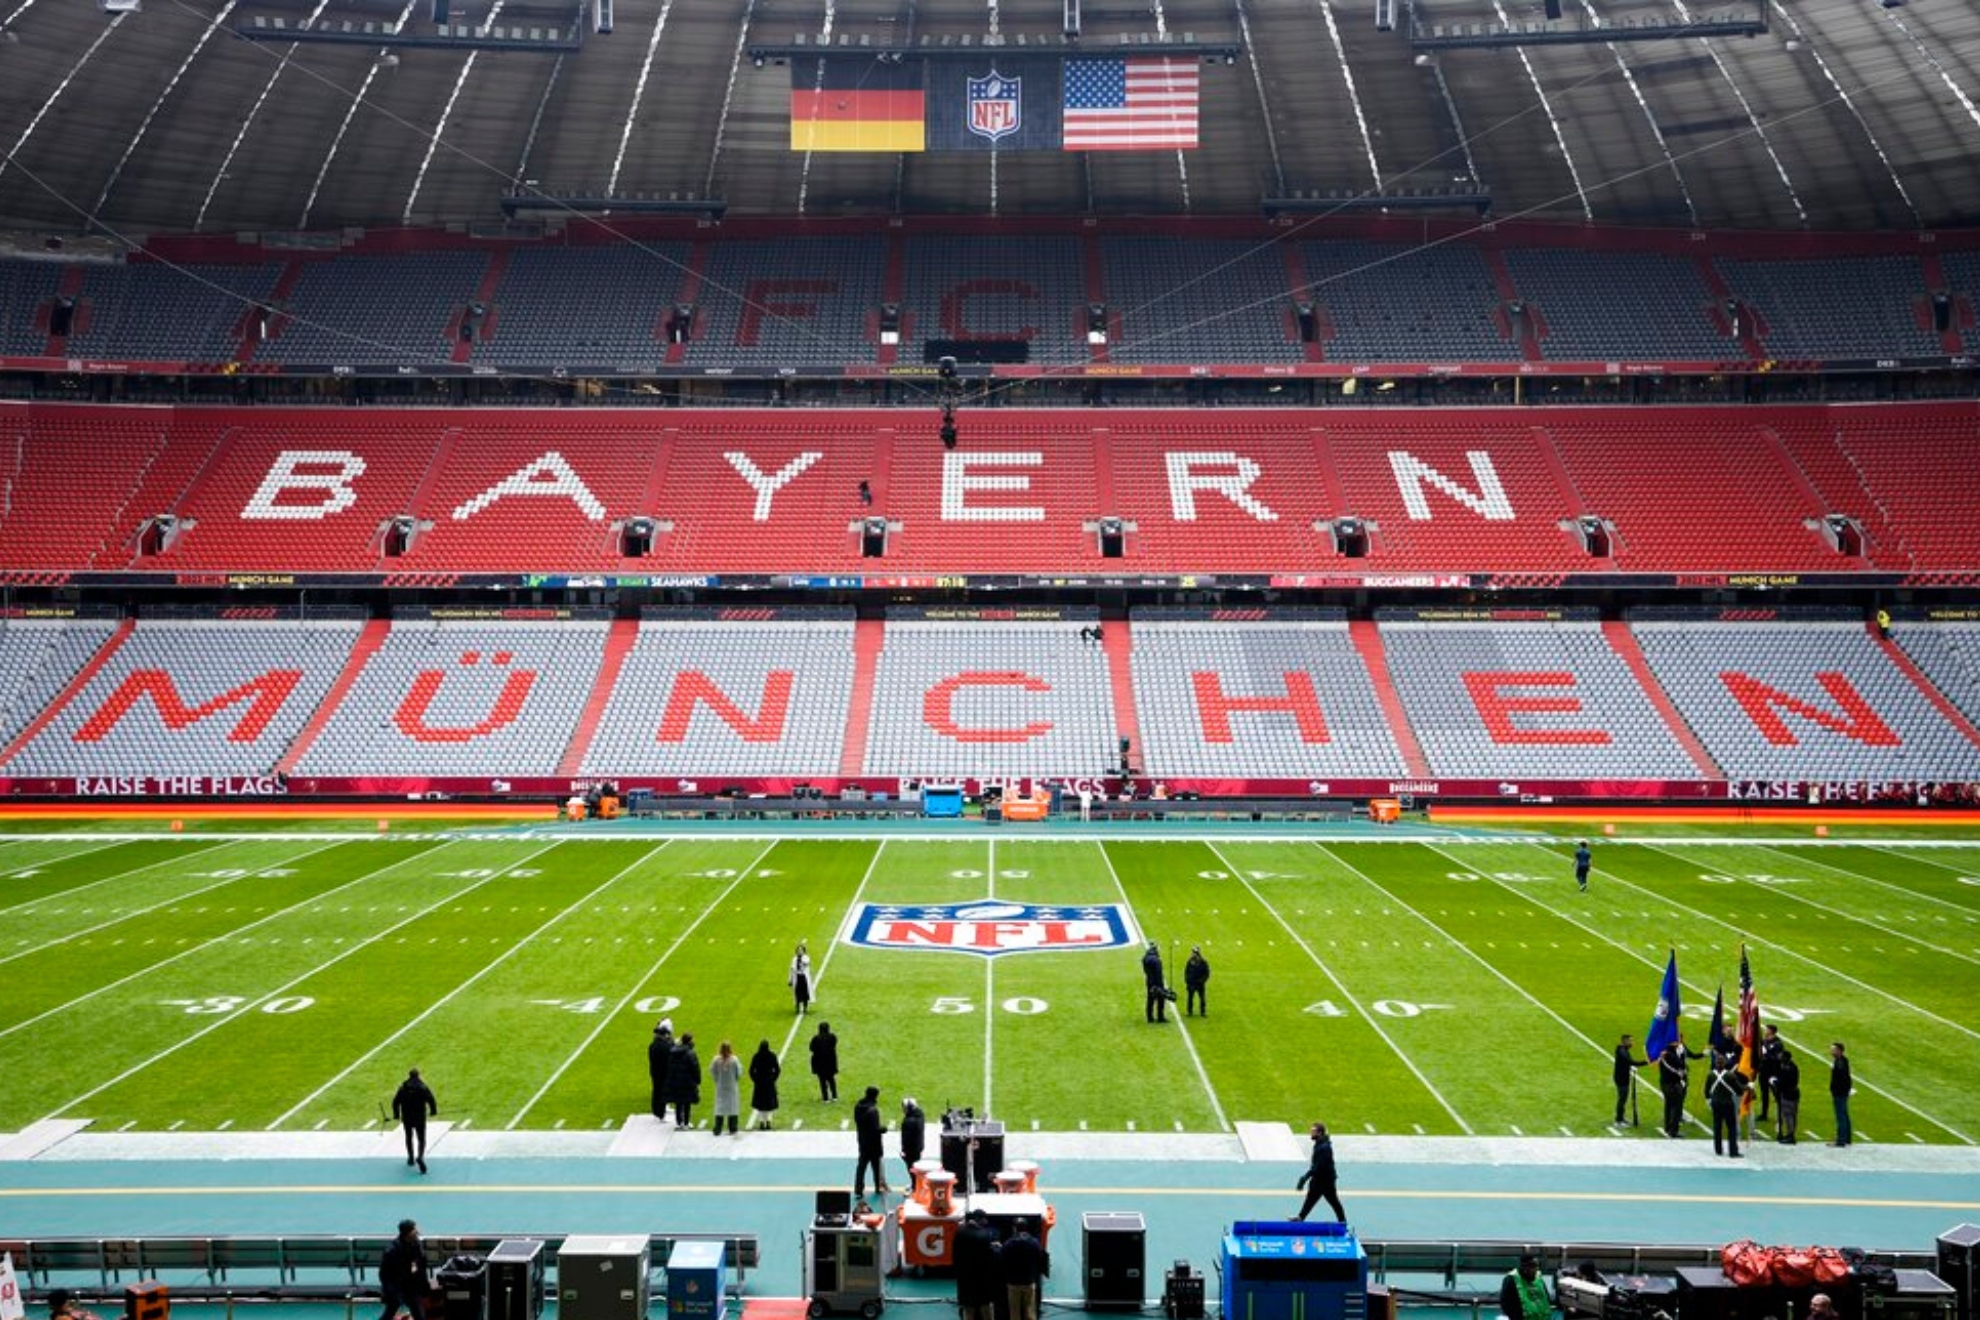 Munich was the host of the first NFL game in Germany